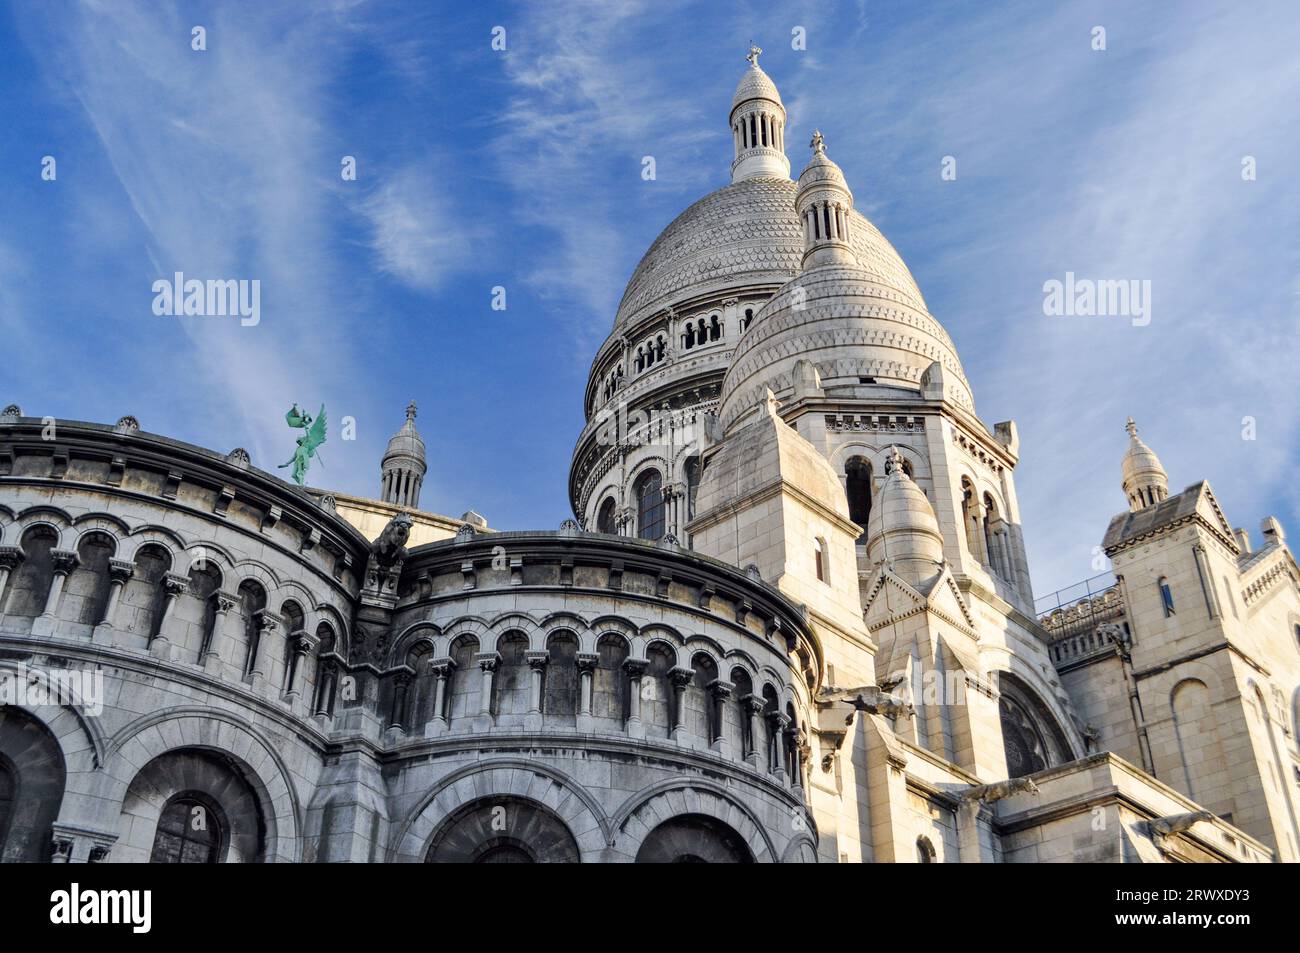 Sunlit facade of the side of the Sacré Coeur Basilica including its domes in Montmartre, Paris, France Stock Photo